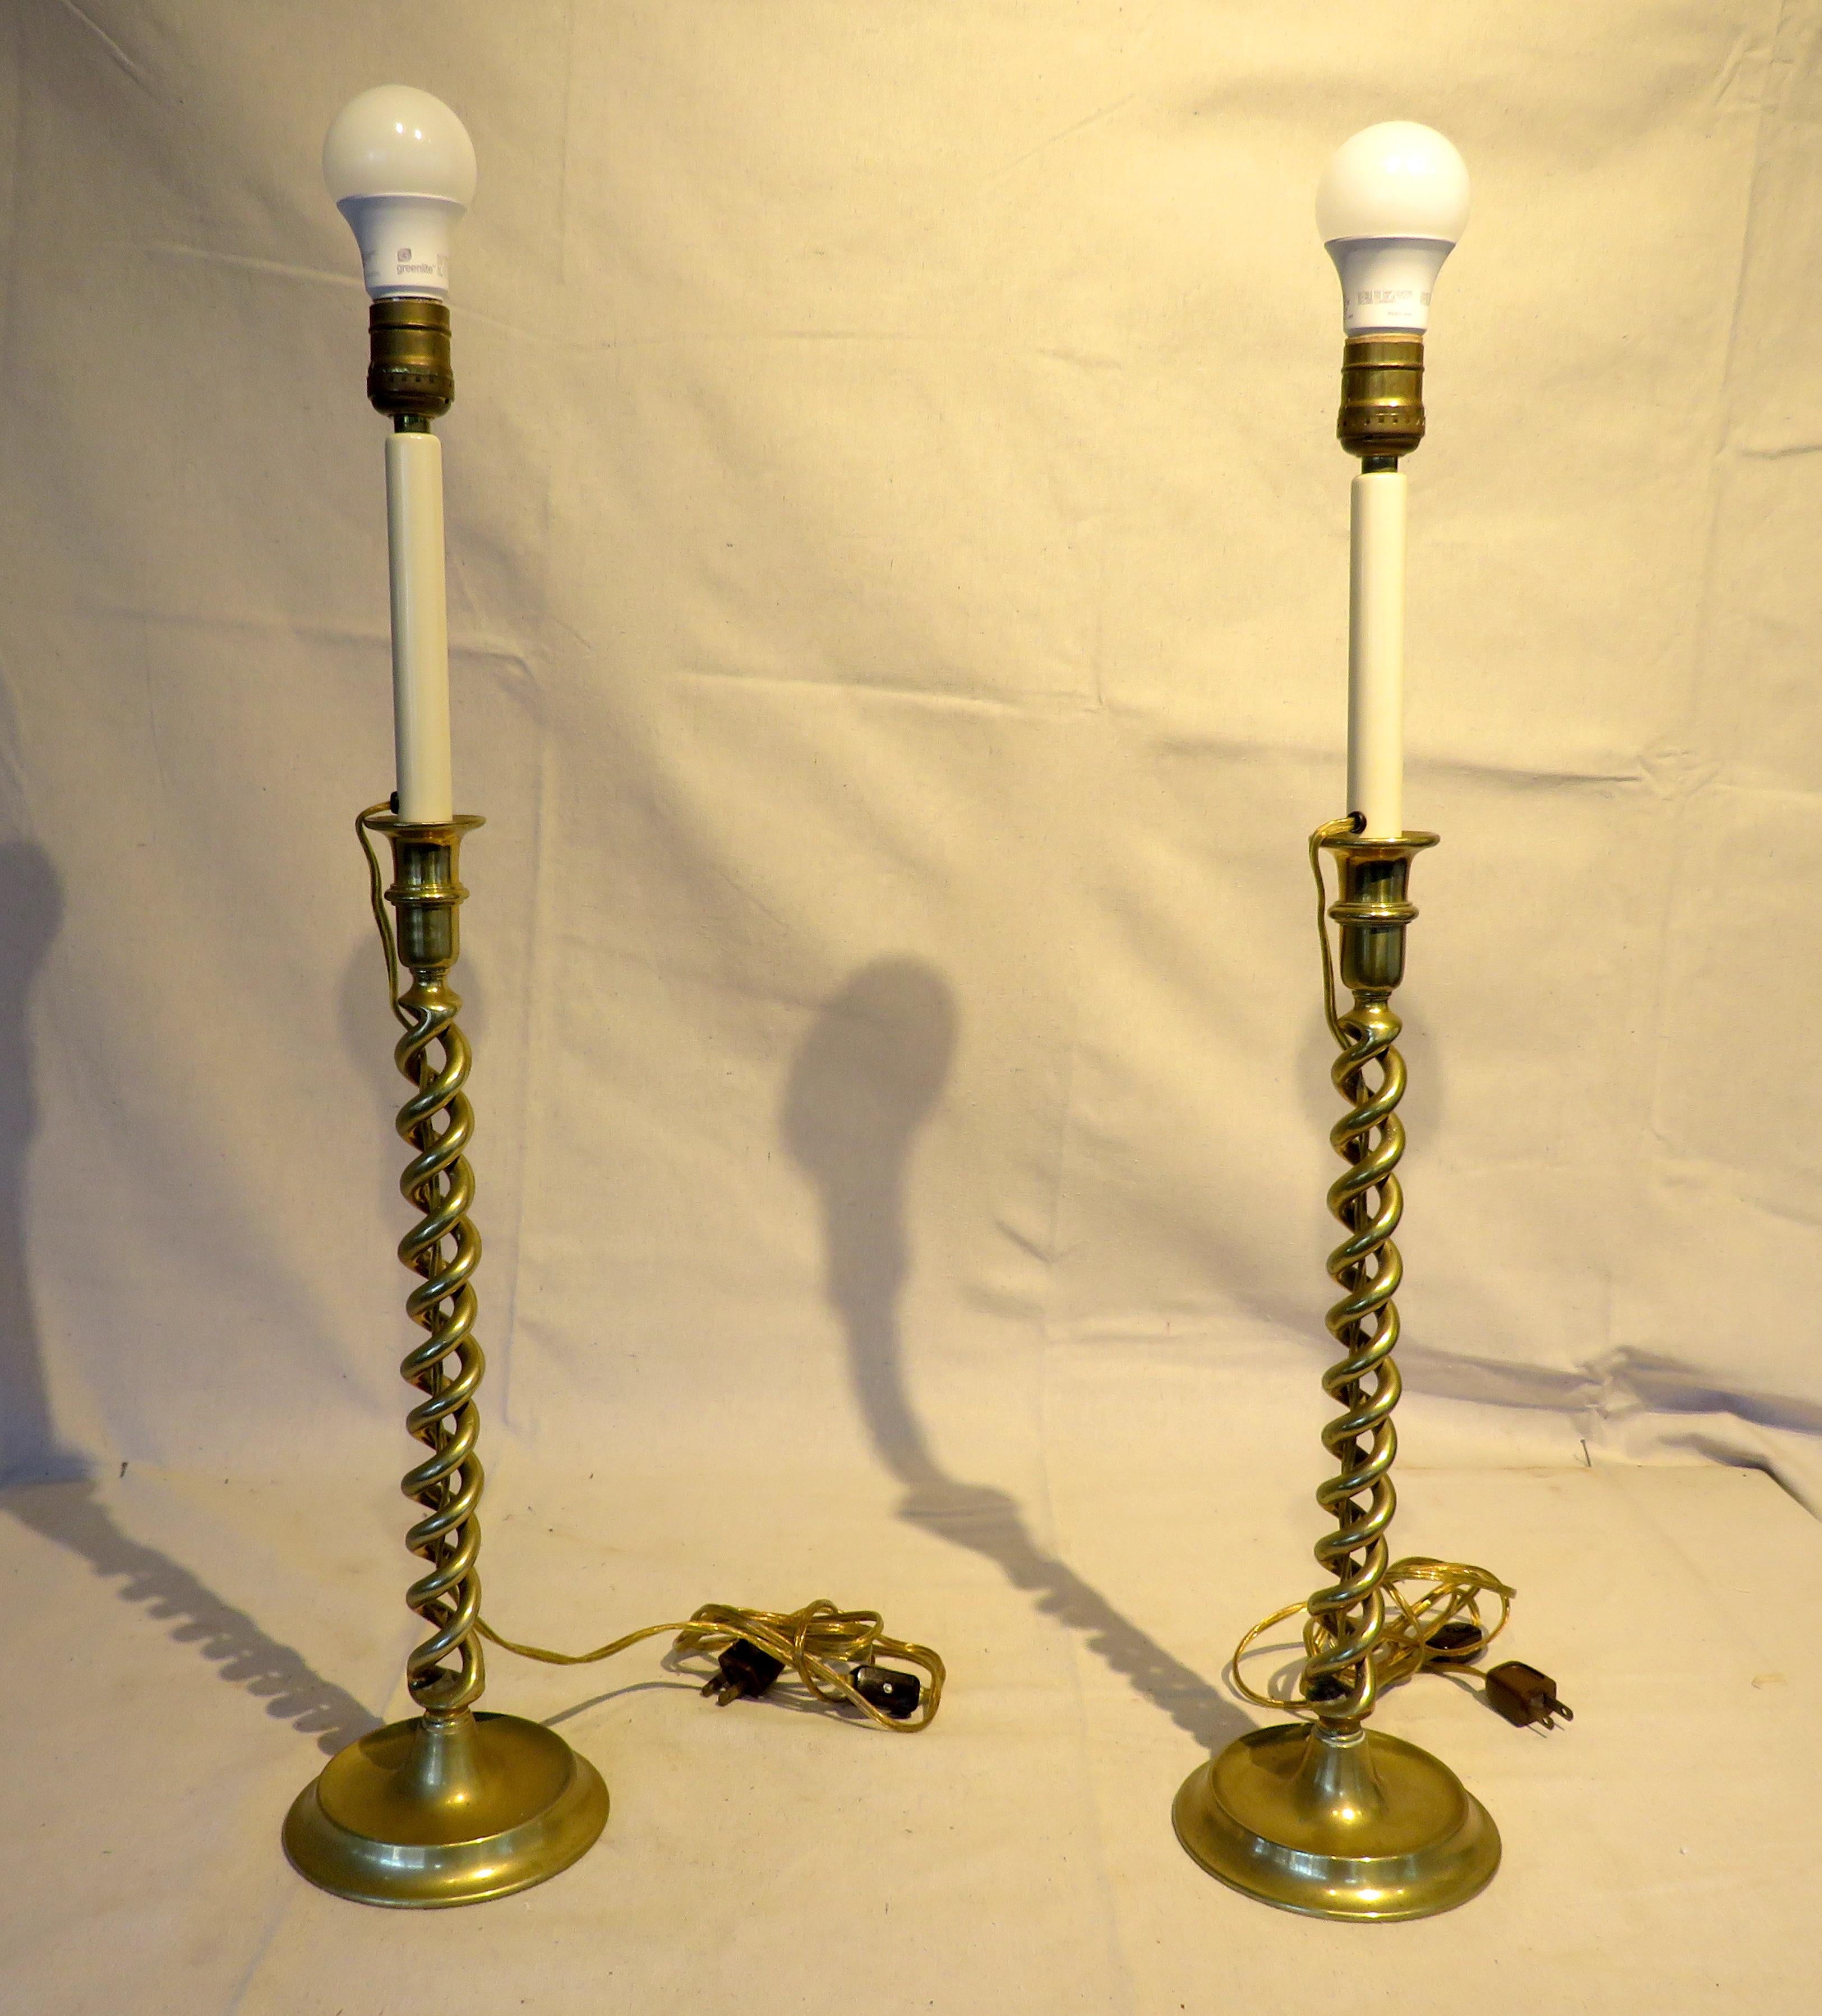 Pair of 19th century brass Barley twist candlestick lamps, electrified, with woven cane shades.